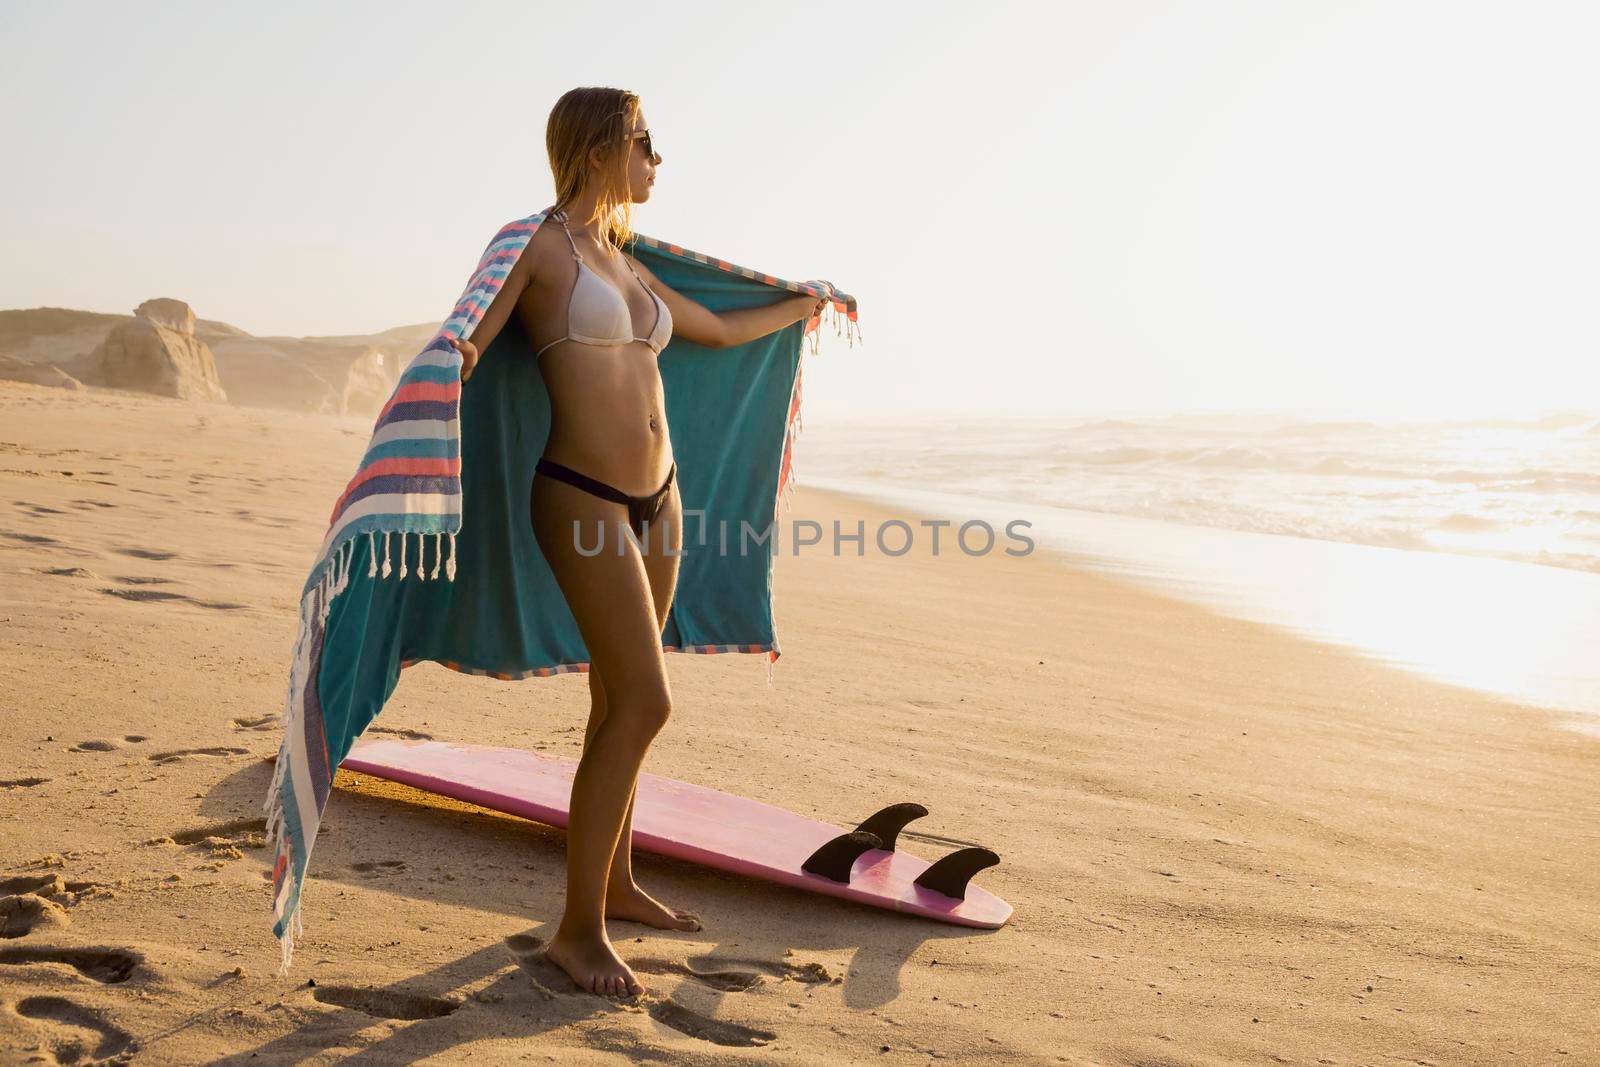 Surfer Girl by Iko